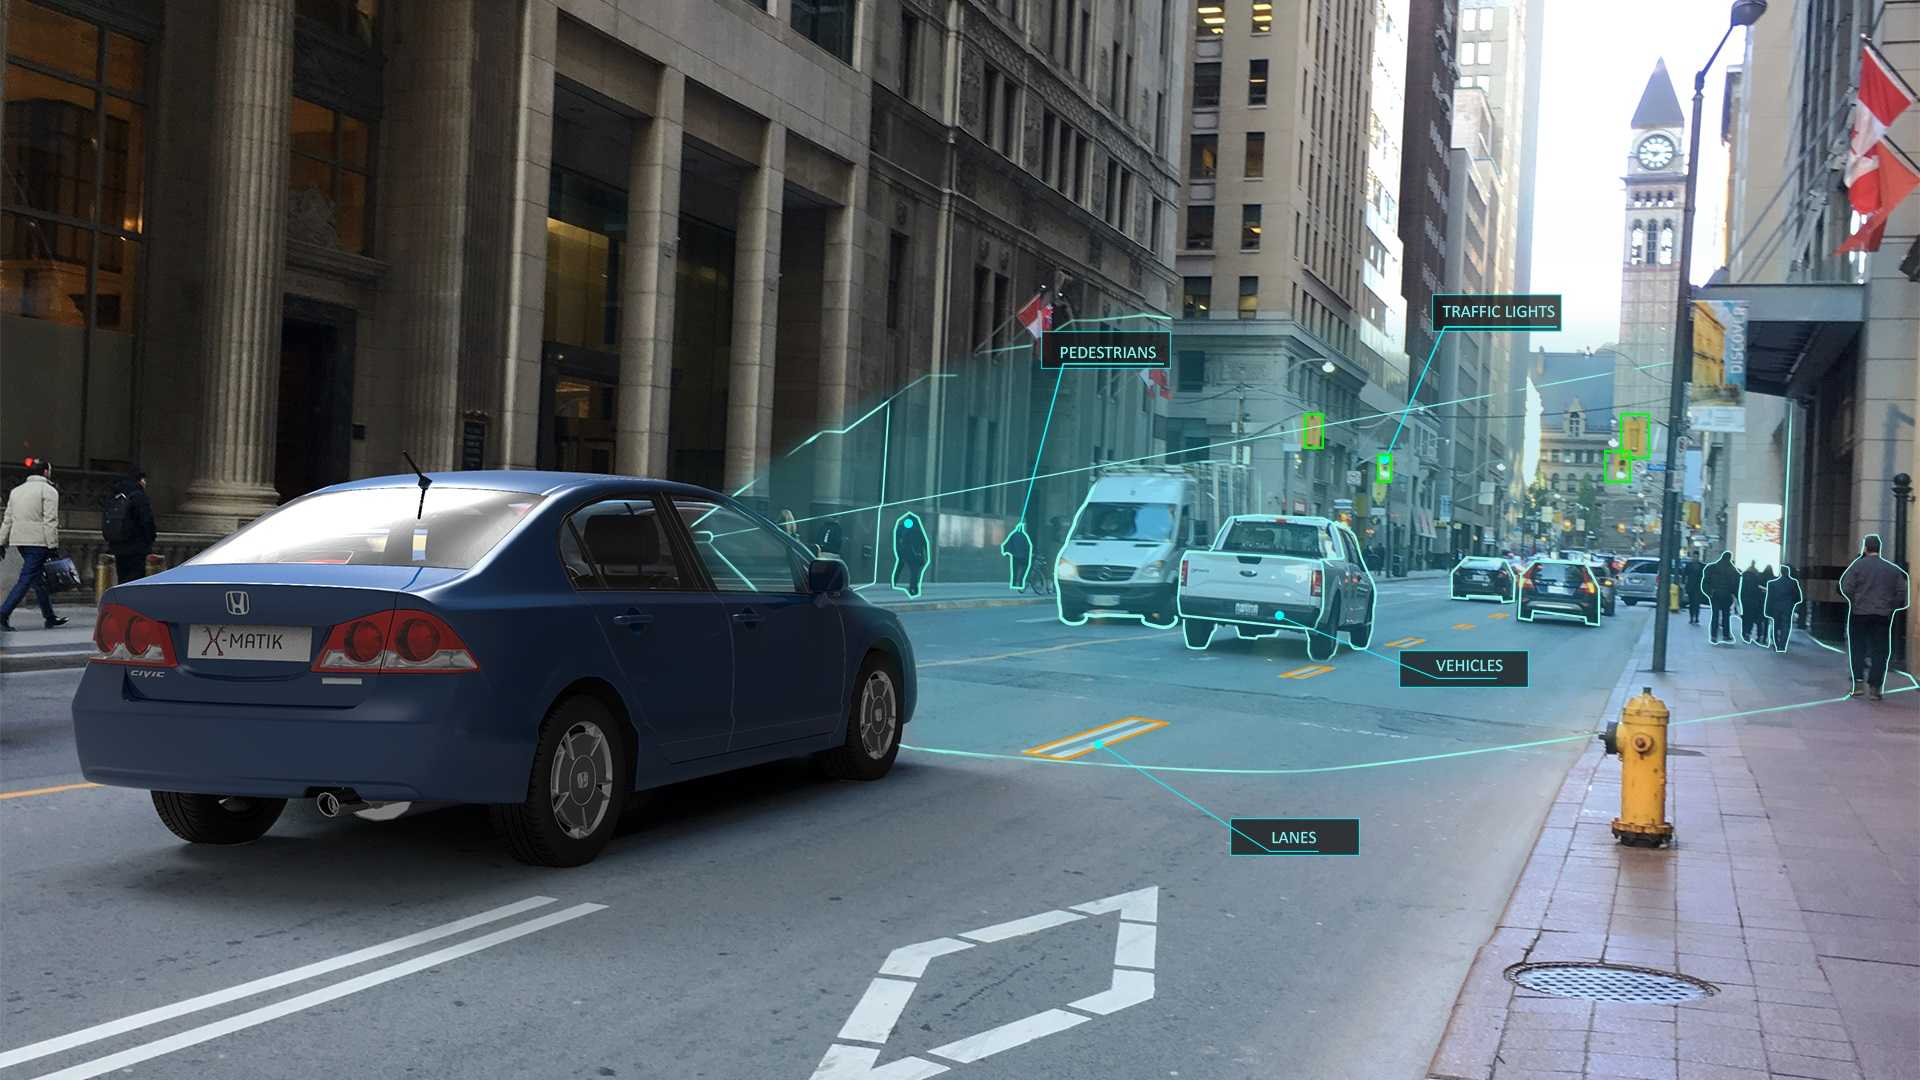 The LaneCruise system will make any car self-driving